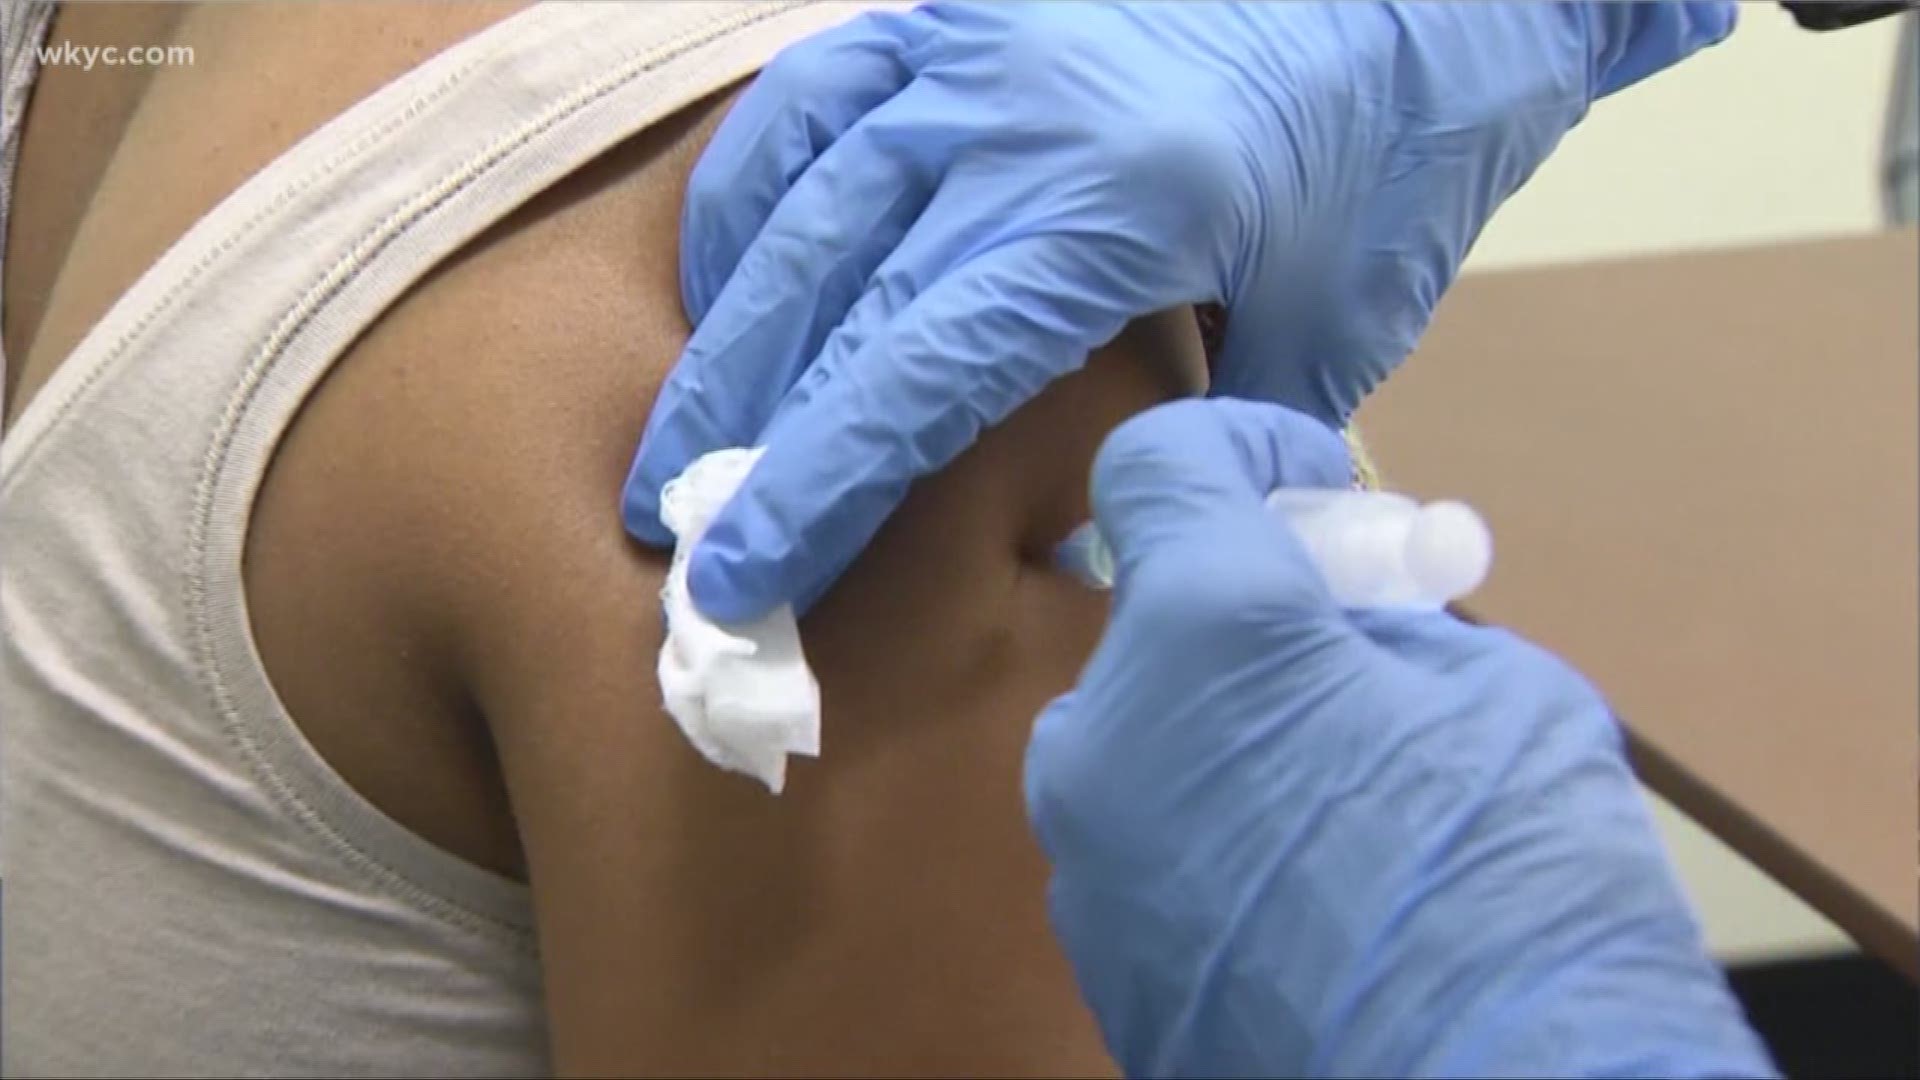 Health officials say there are double the number of confirmed flu cases compared to this time last year. Doctors also say there are signs the vaccine against the main strain is only 10 percent effective.